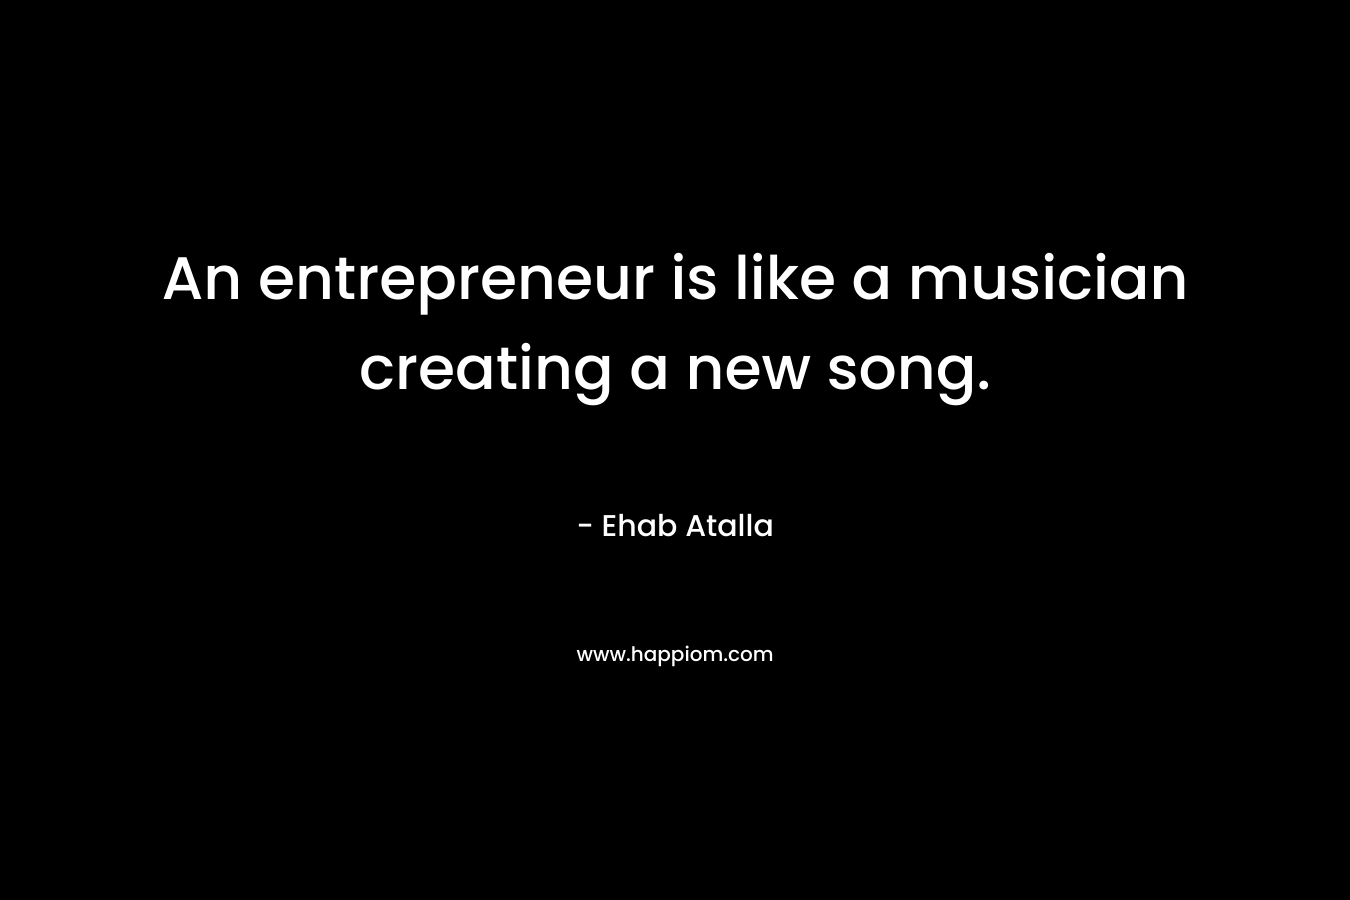 An entrepreneur is like a musician creating a new song.